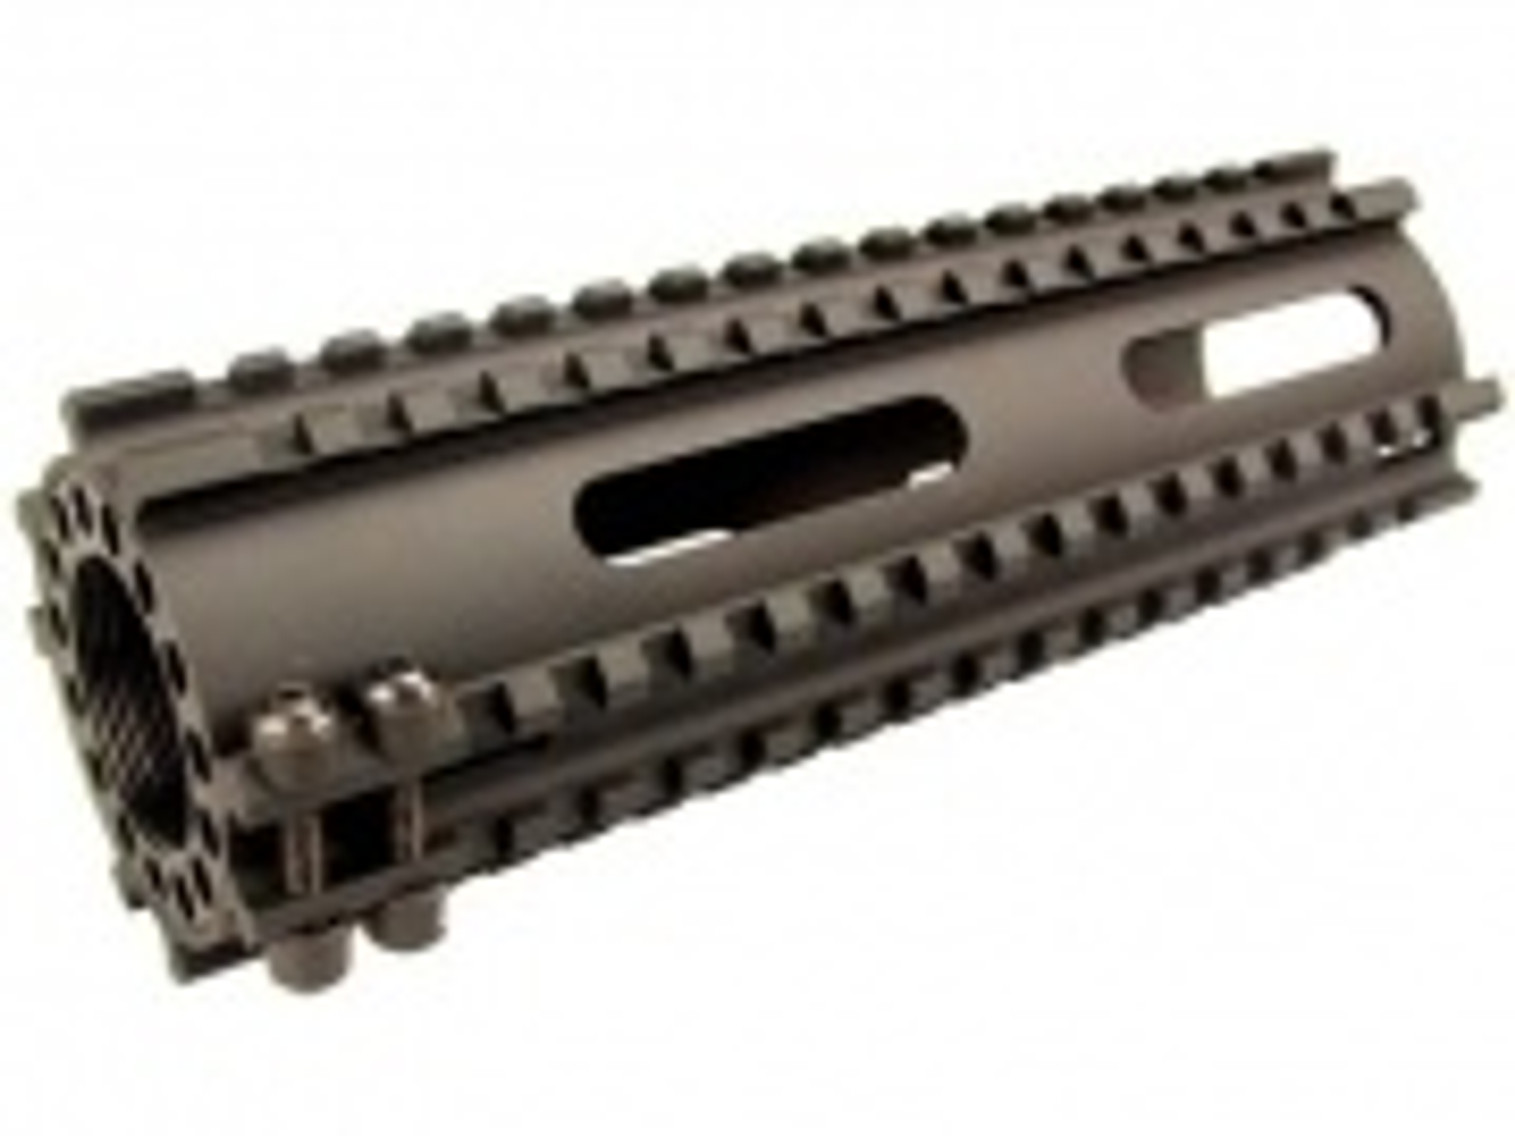 MA-73 Rail Adapter System (R.A.S.)